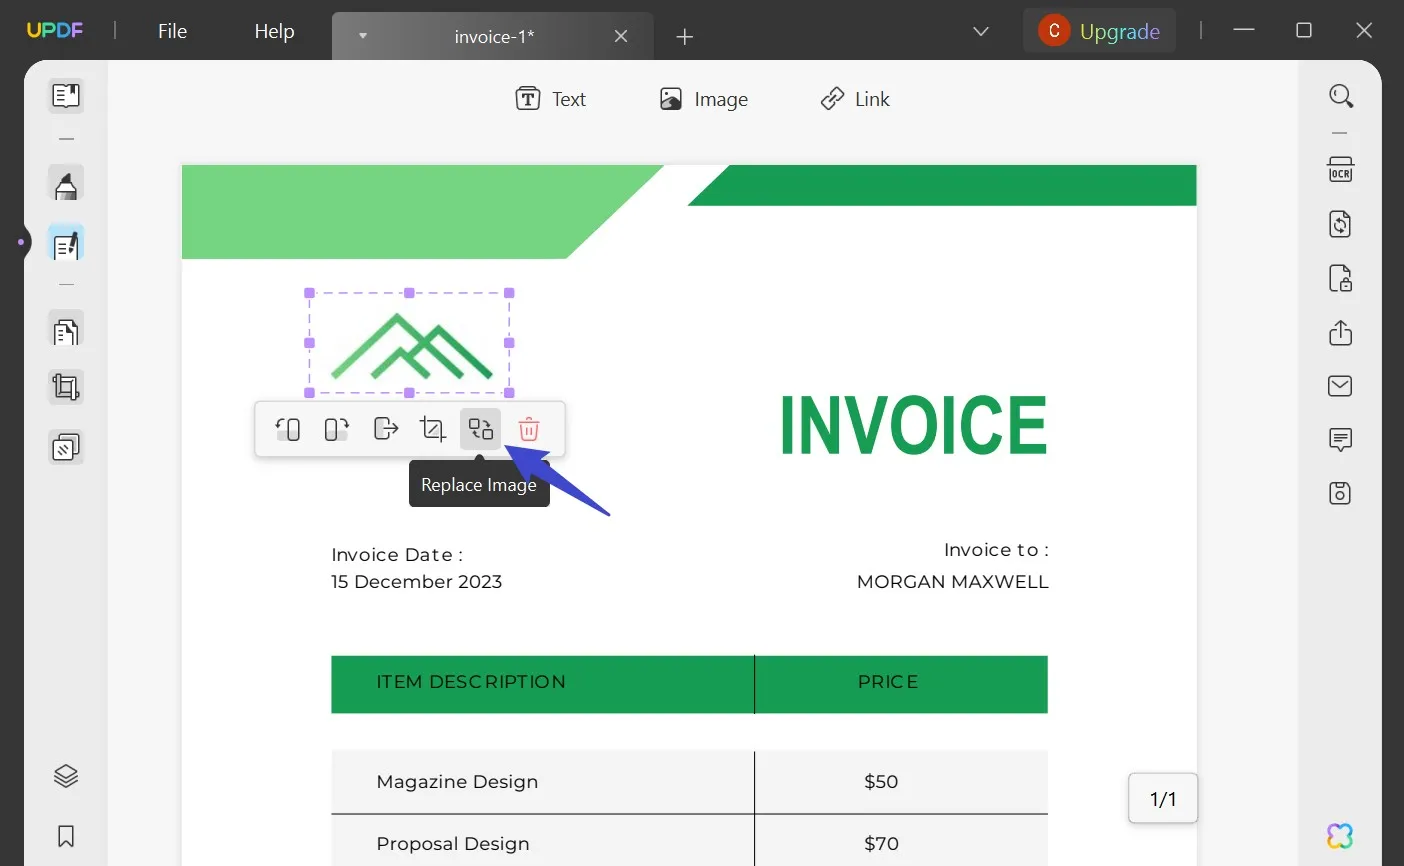 how to edit a receipt edit invoice updf